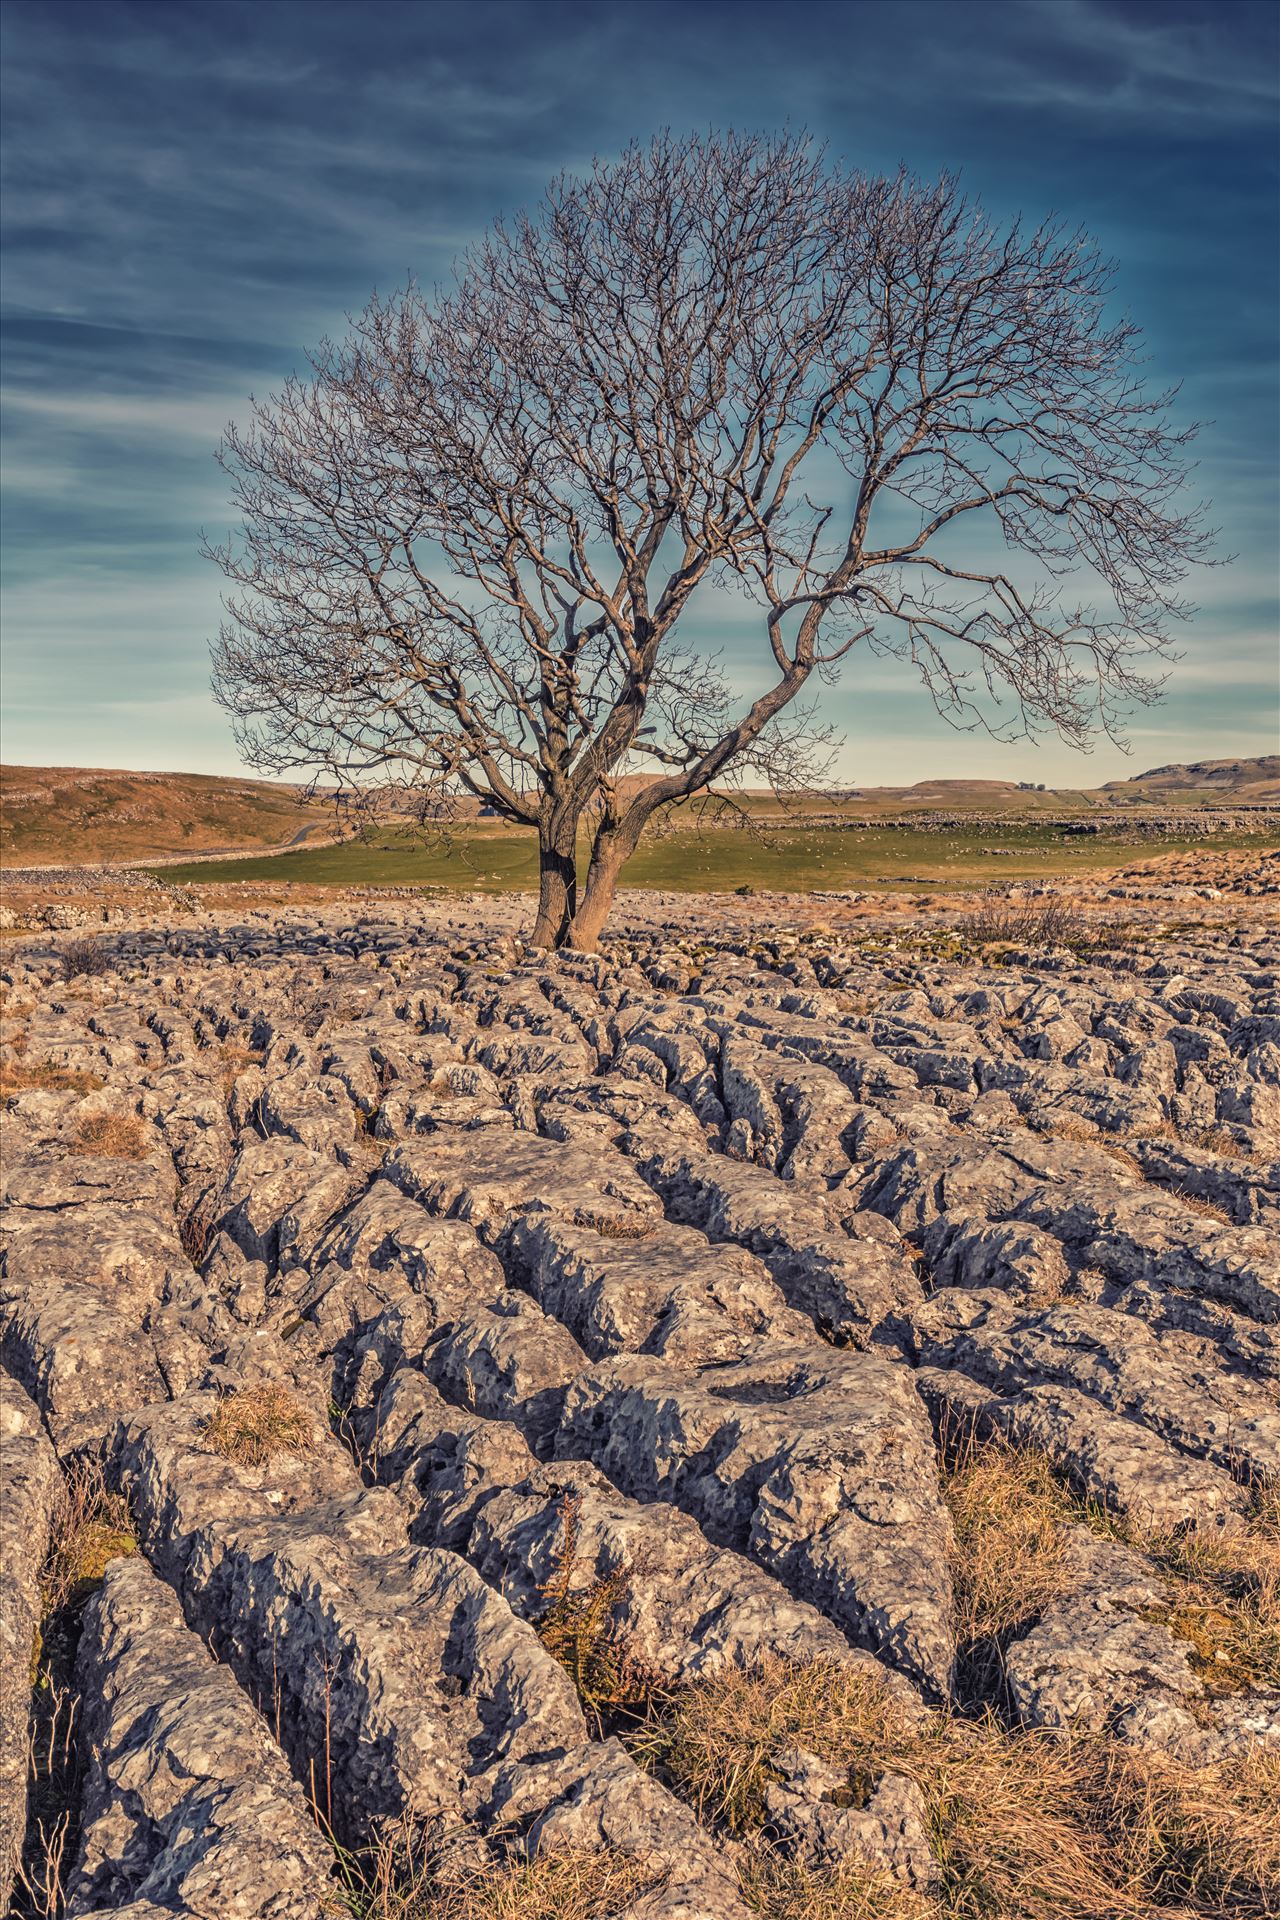 The Lone Tree nr Malham (also available in B&W) Known as "limestone pavements", these plateaus of bare and weathered rock often being found at the top of the limestone cliff running along the hillsides. These were originally formed by the scouring action of glaciers during the last ice age. by philreay